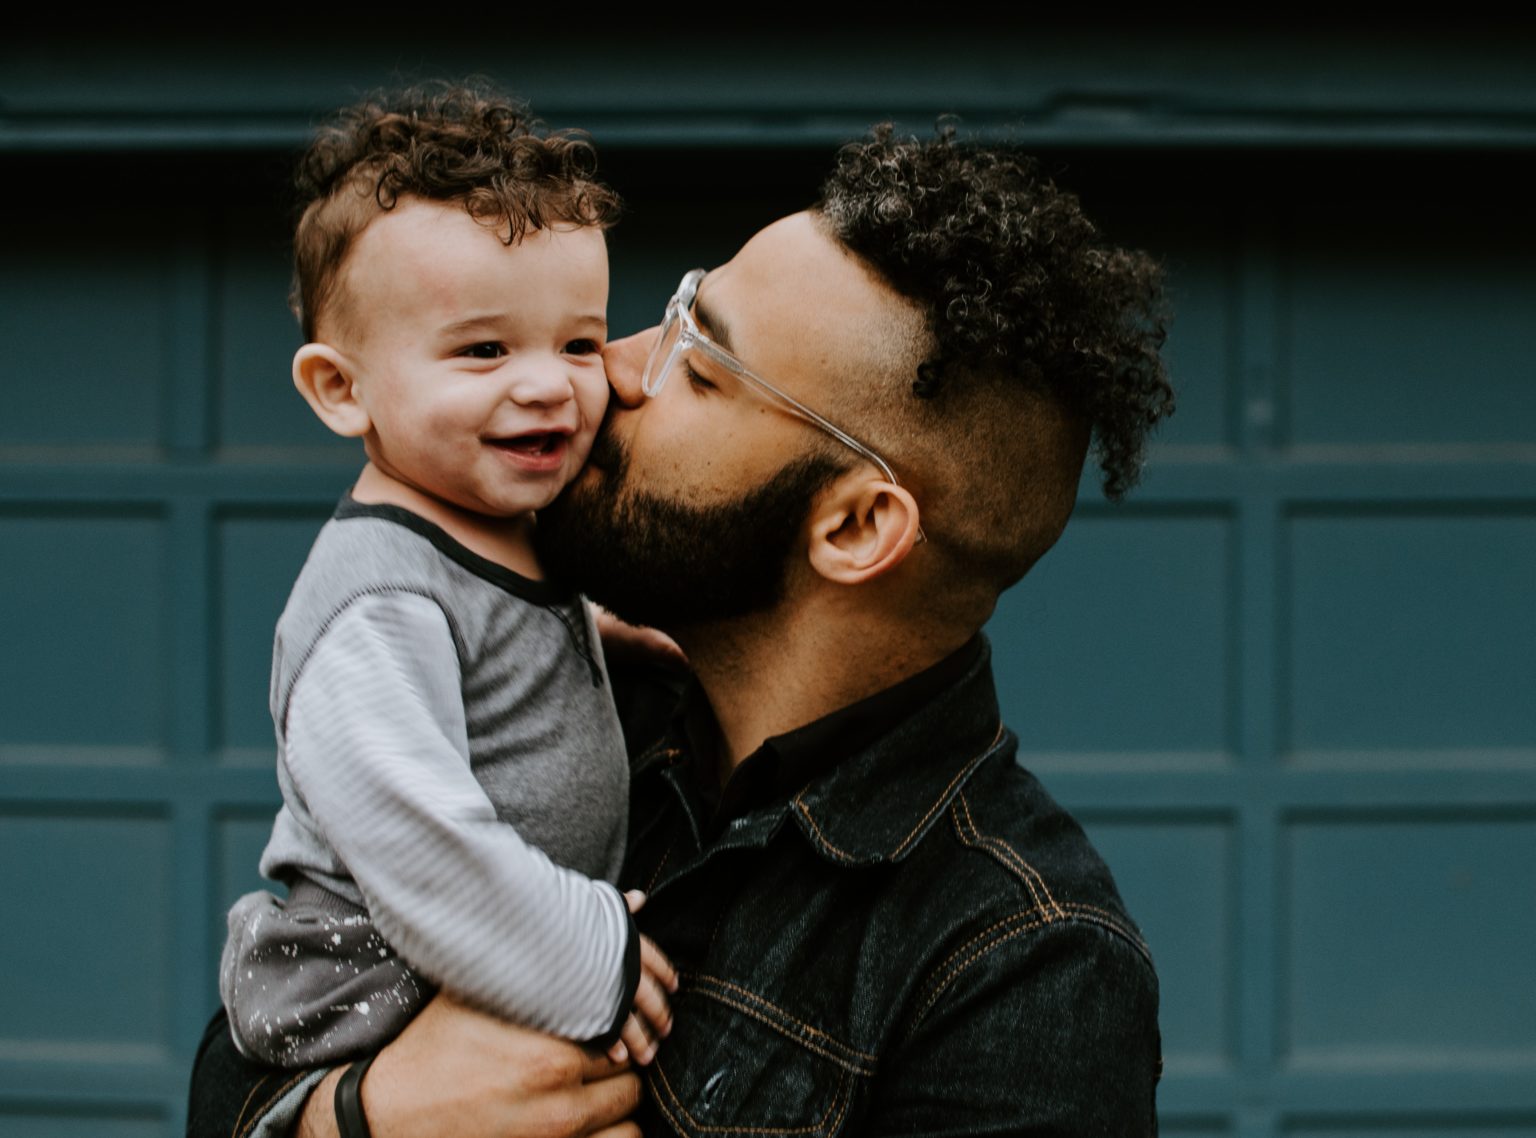 Why Our Community Needs Dads